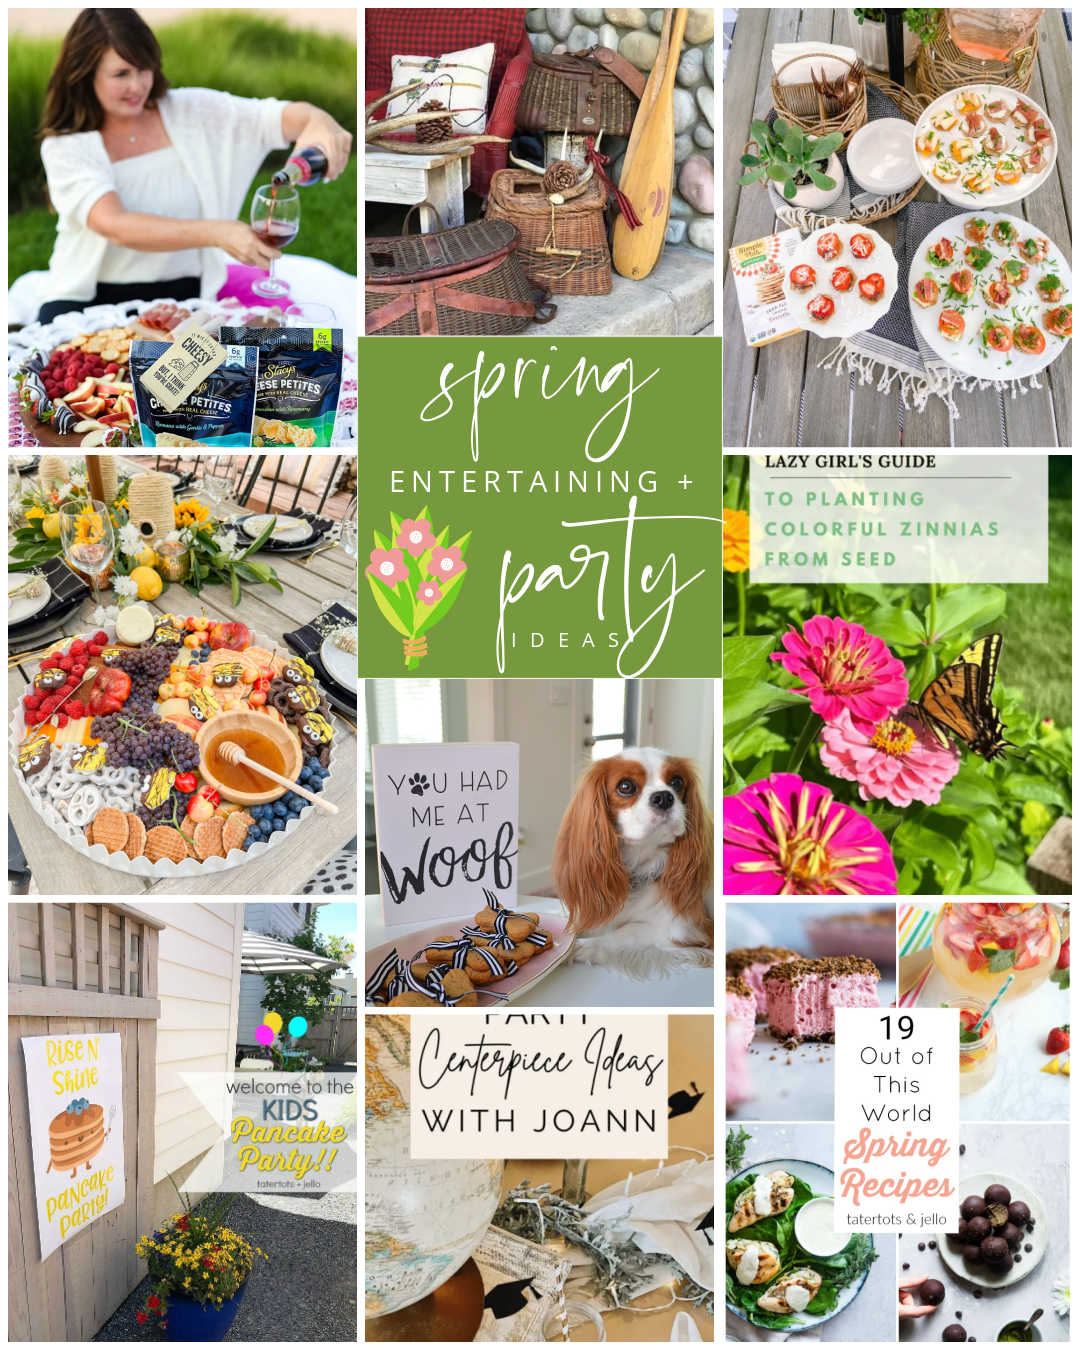 Spring Entertaining and Party Ideas. Get ready for Spring parties and entertaining with these beautiful and tasty ideas!